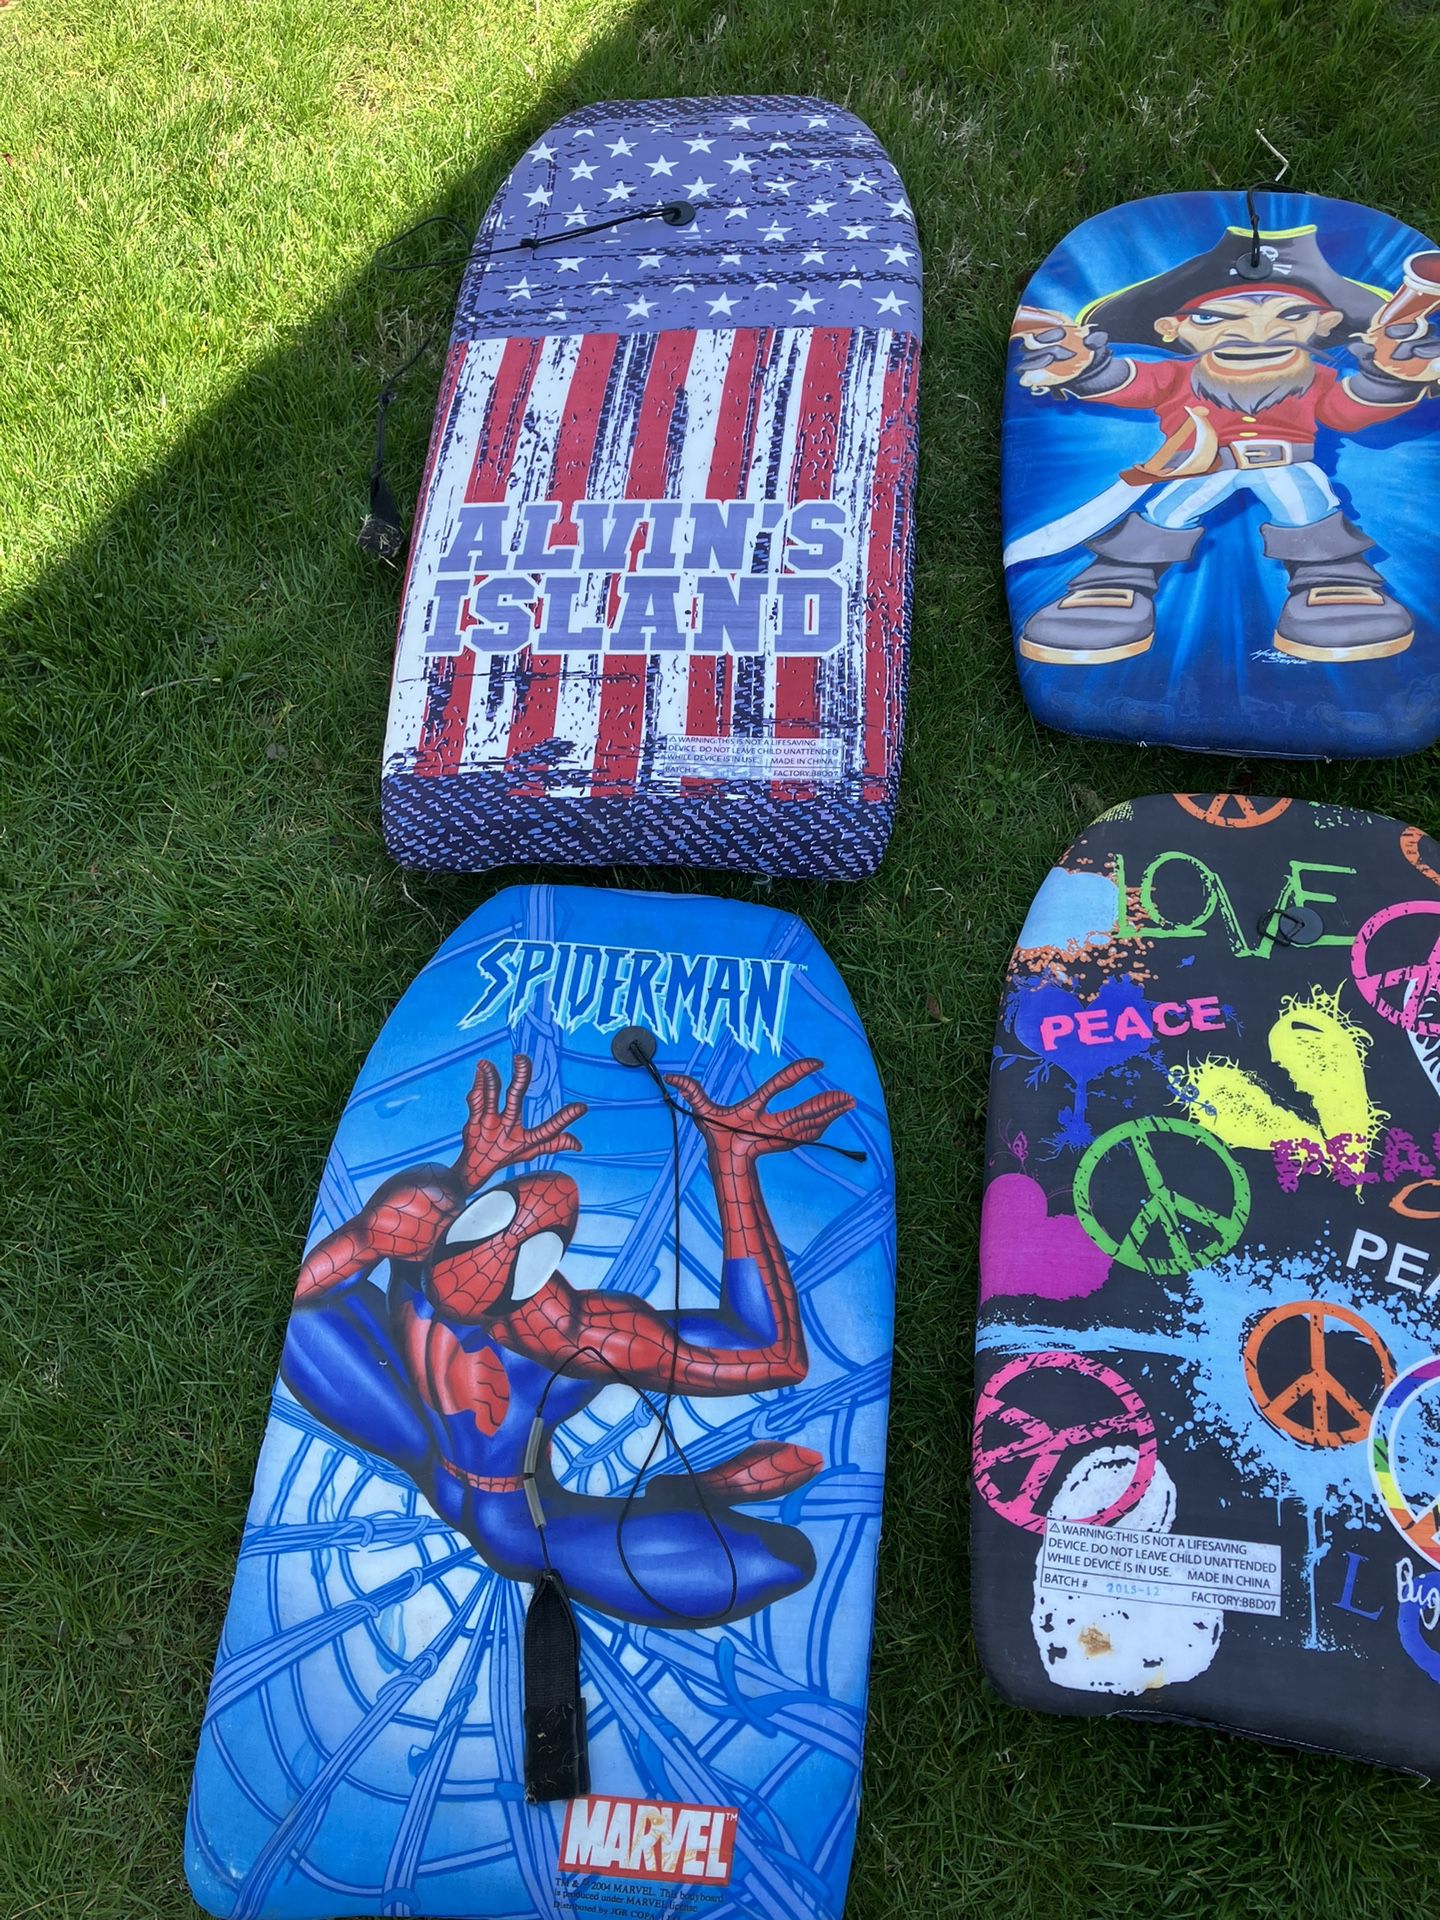 4 Water Fun Boogie Boards For 1 Price 